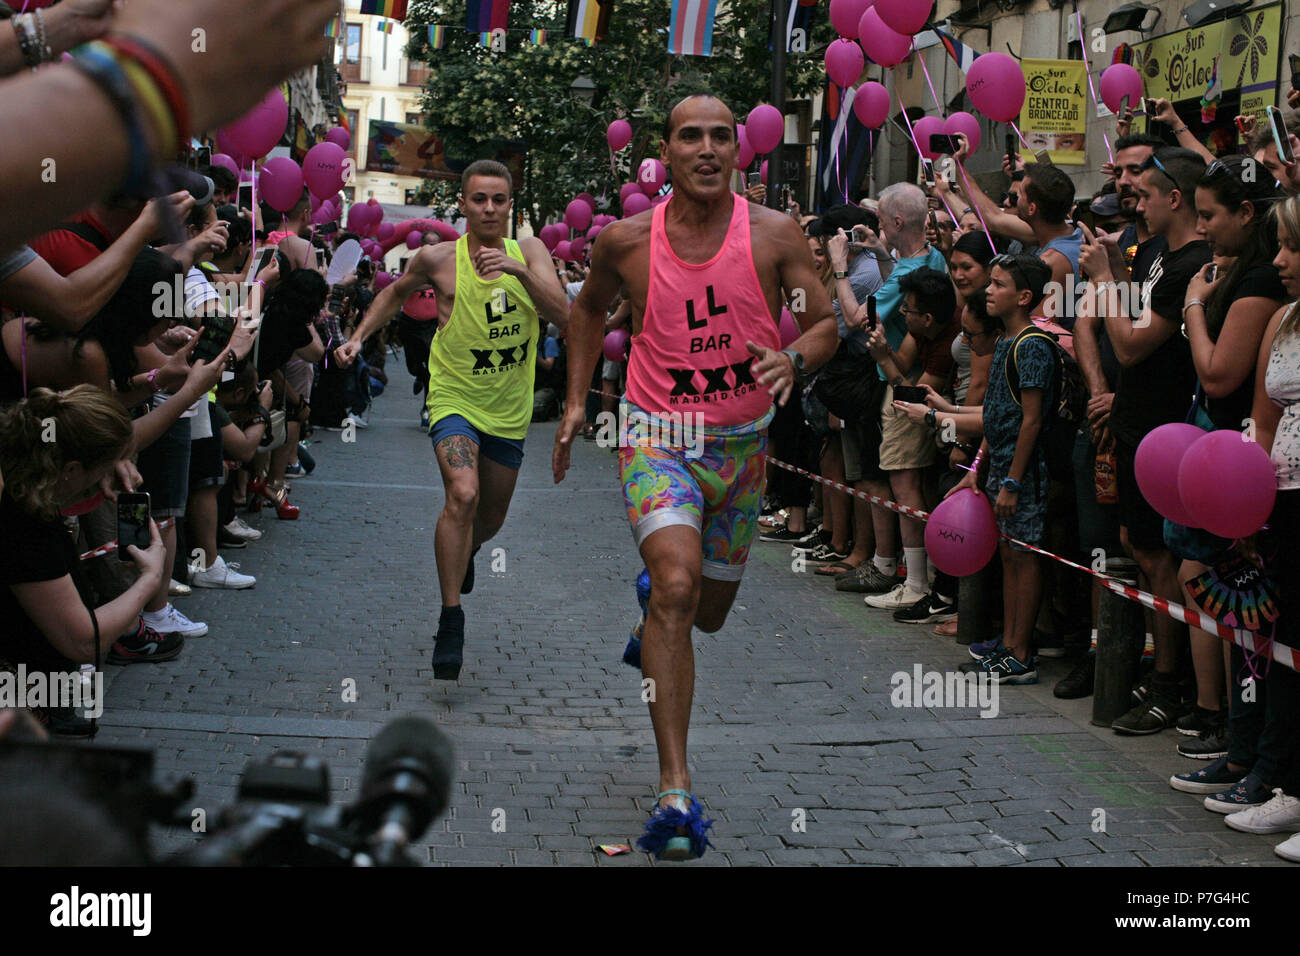 Madrid, Madrid, Spain. 5th July, 2018. Participants are seen running in  heels while the crowd cheers.The high heels race is one of the activities  that toke place during the LGBT gay pride